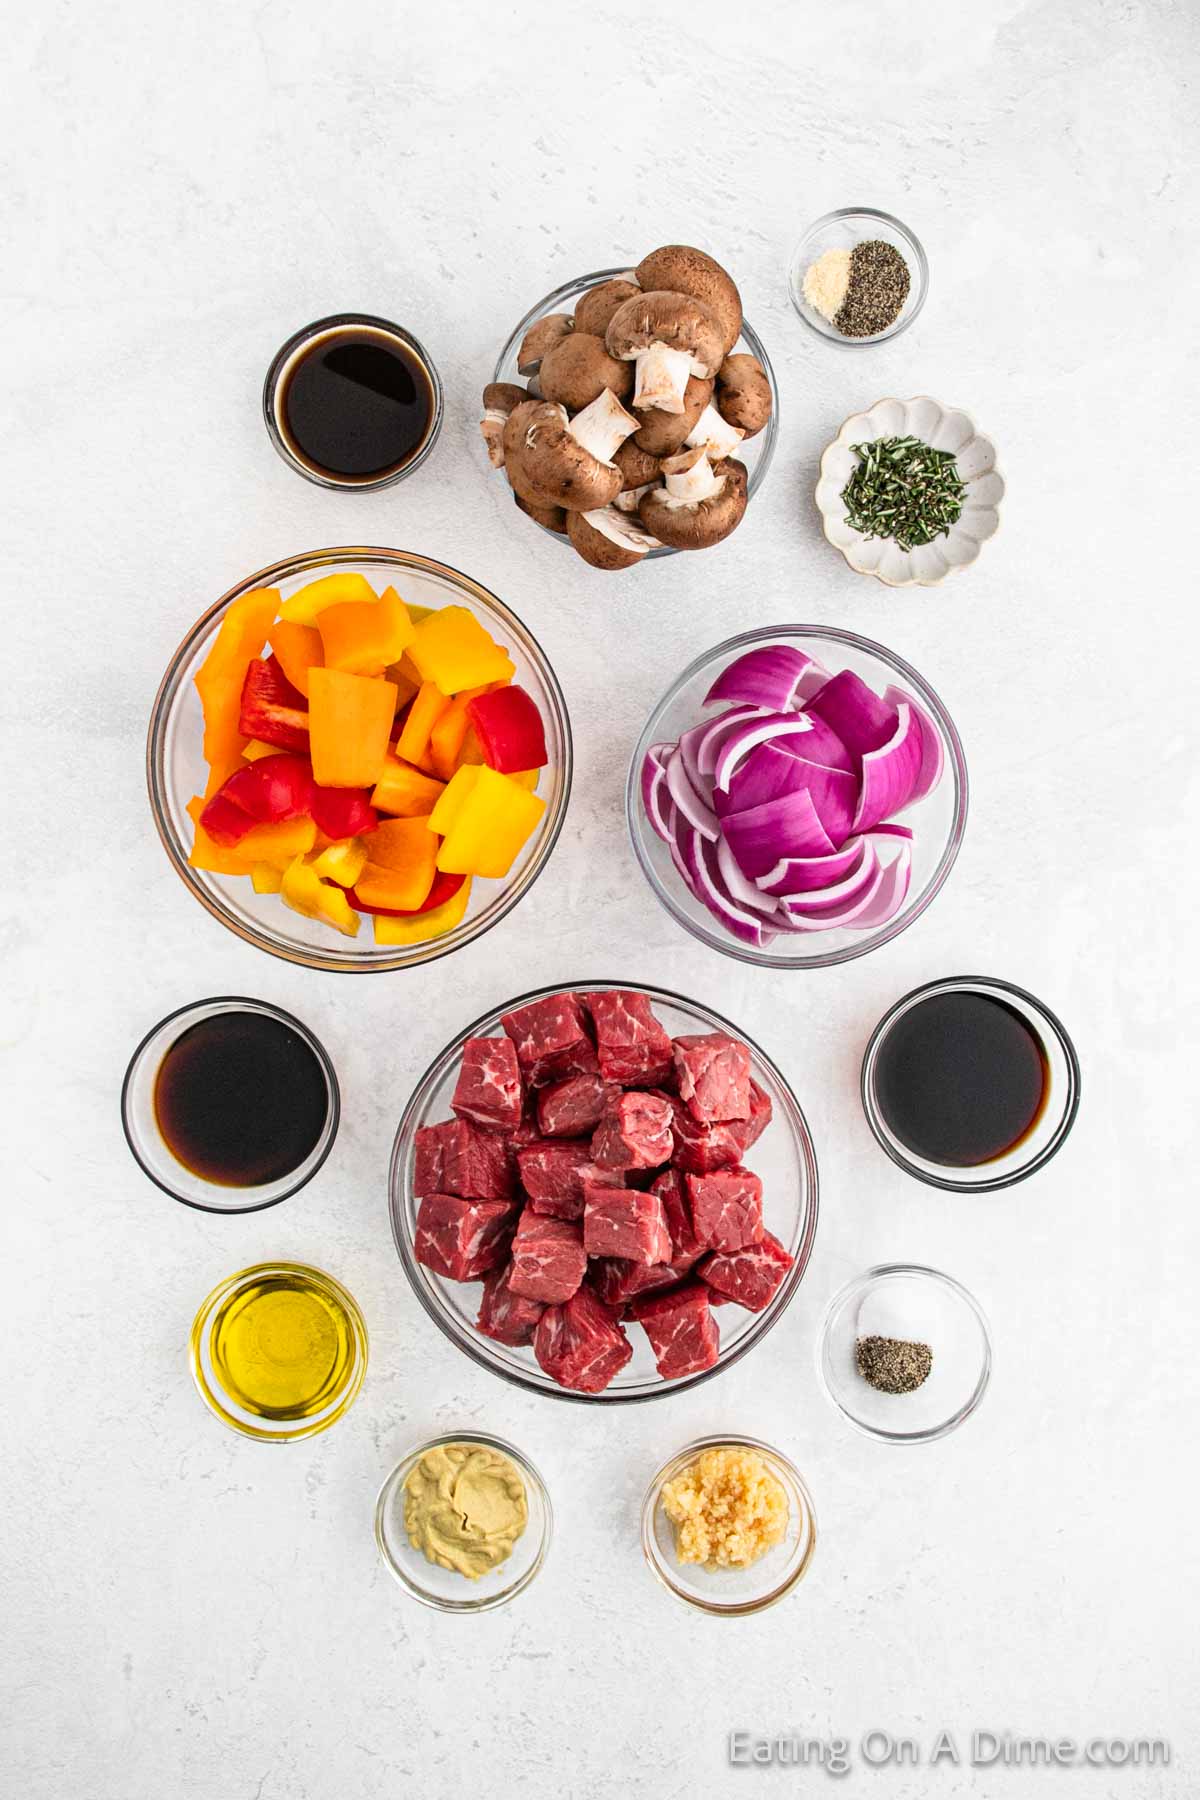 Ingredients - balsamic vinegar, soy sauce, worcestershire sauce, olive oil, rosemary, dijon mustard, pepper, onion powder, beef sirloin, mushrooms, bell peppers, red onion, 